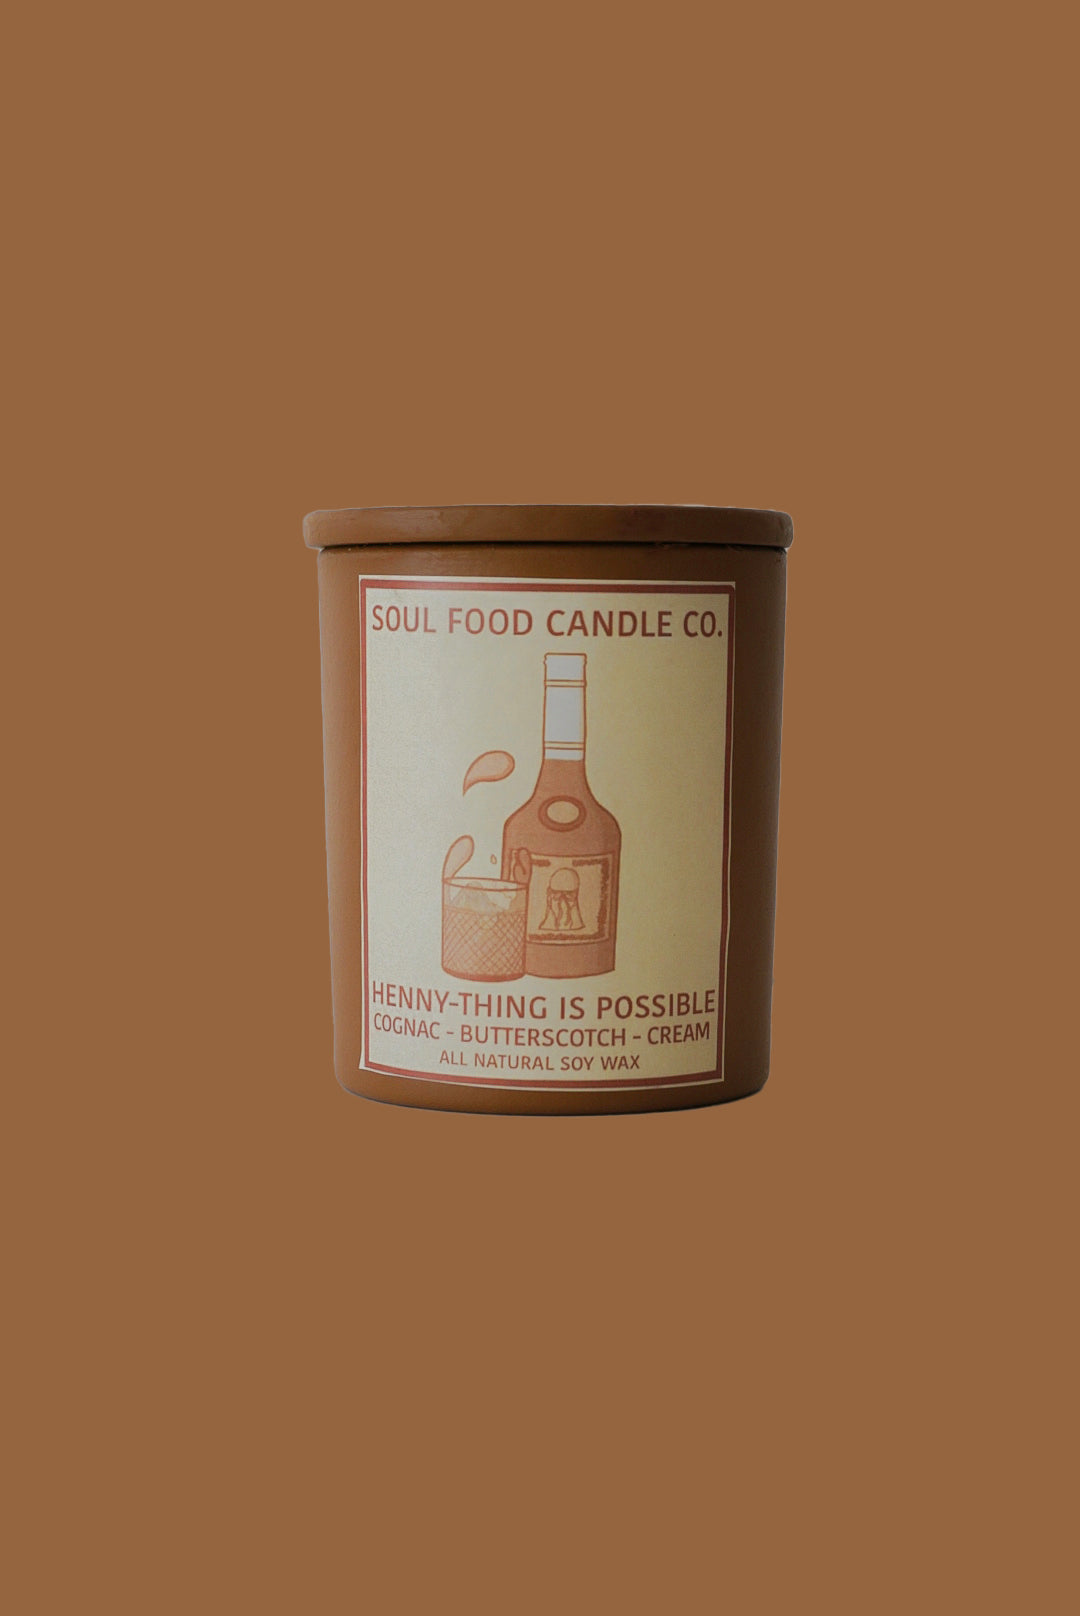 Henny-Thing is Possible - Soul Food Candle Company